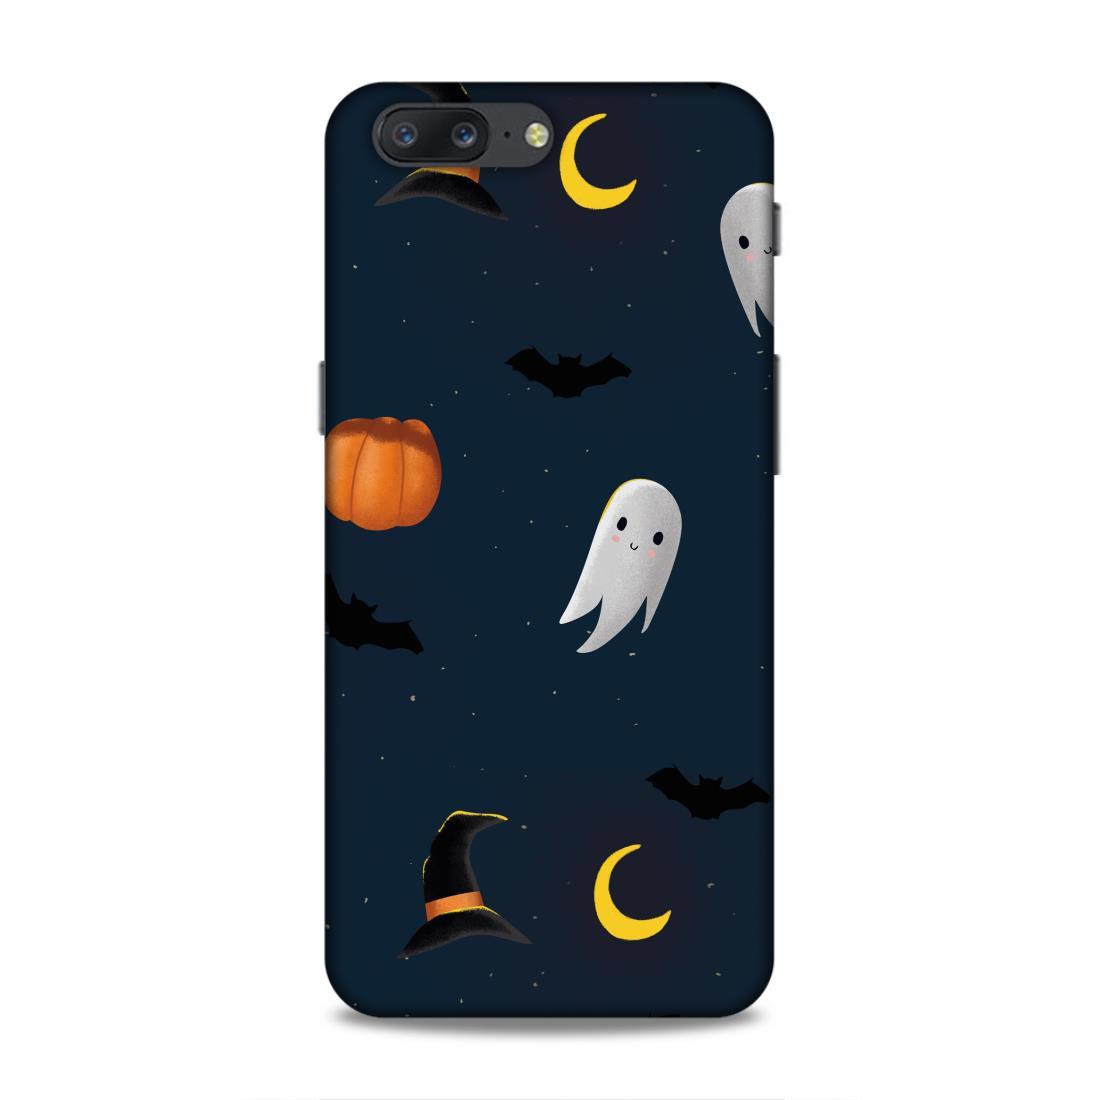 Cute Ghost OnePlus 5 Mobile Case Cover